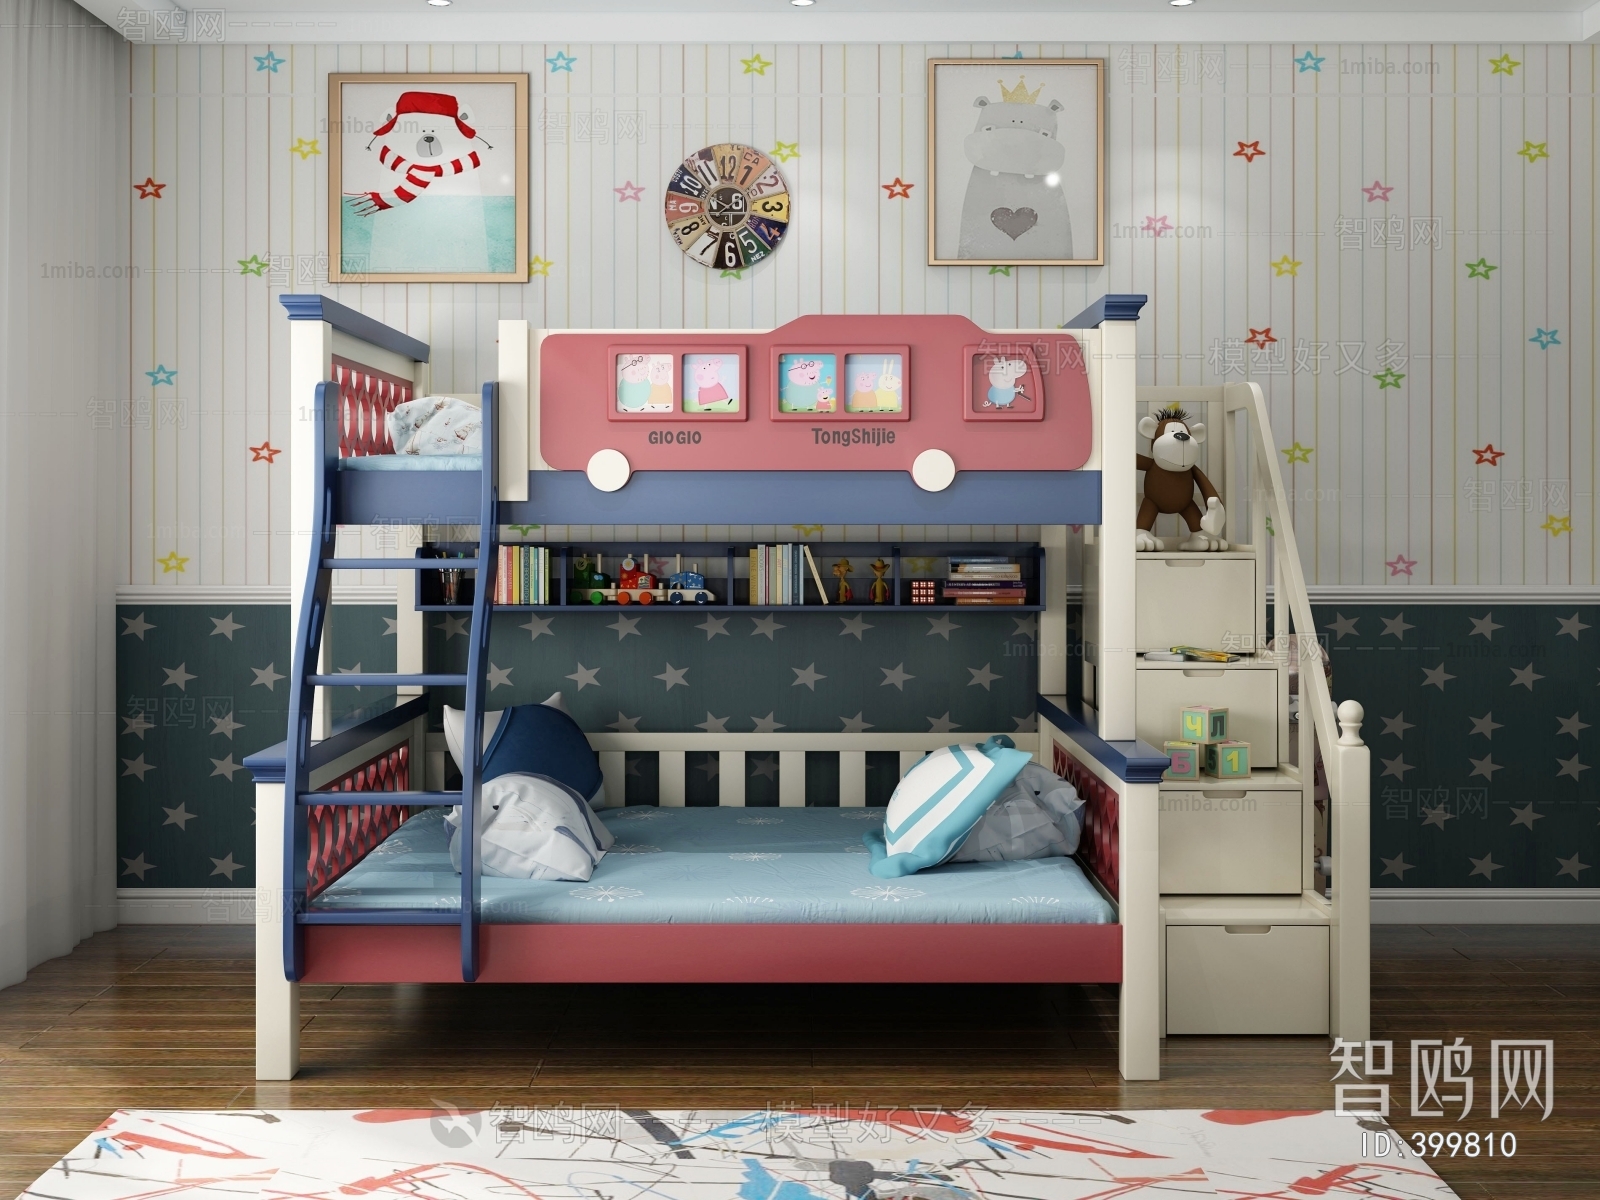 American Style Bunk Bed